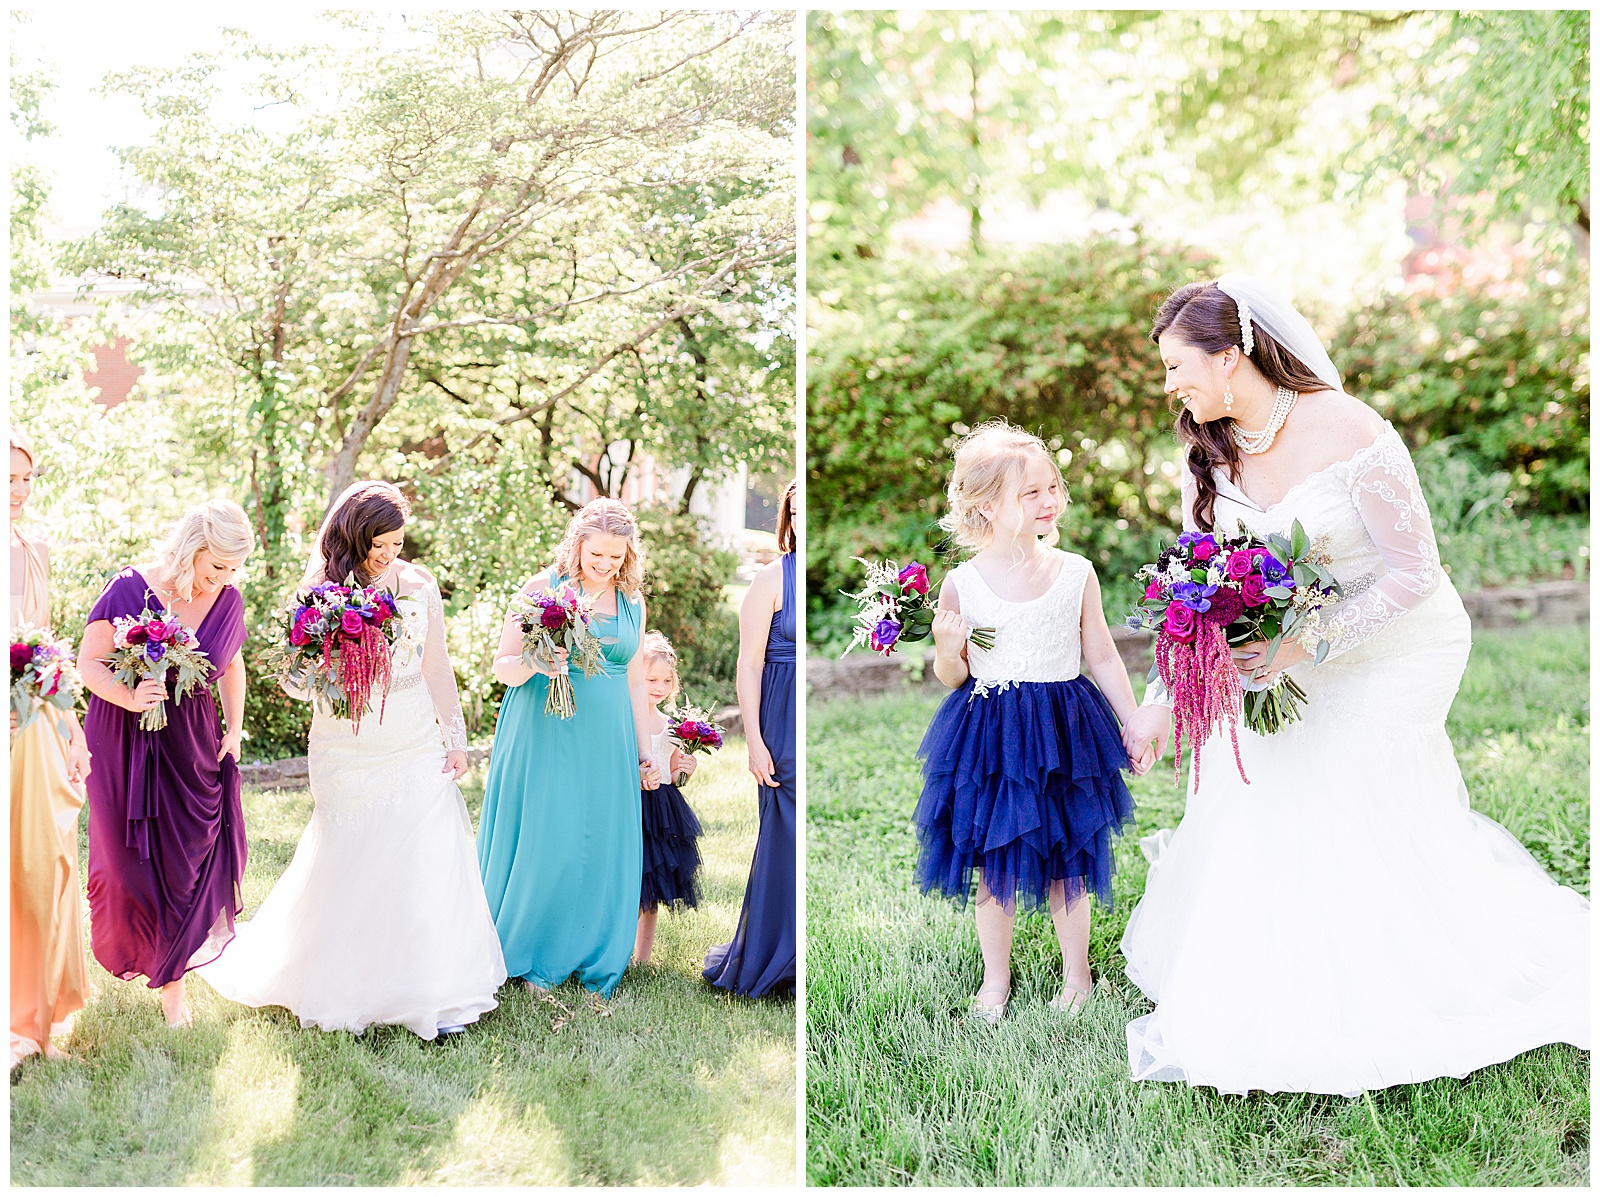 💍 cute flower girl twirling and bold color bridesmaid dresses and bouquet detail shot 👰 Bride: lace wedding dress with rhinestone belt rhinestone barrette in hair down with pearls 💍 Bright Colorful Summer City Wedding in Charlotte, NC with Taryn and Ryan | Kevyn Dixon Photography